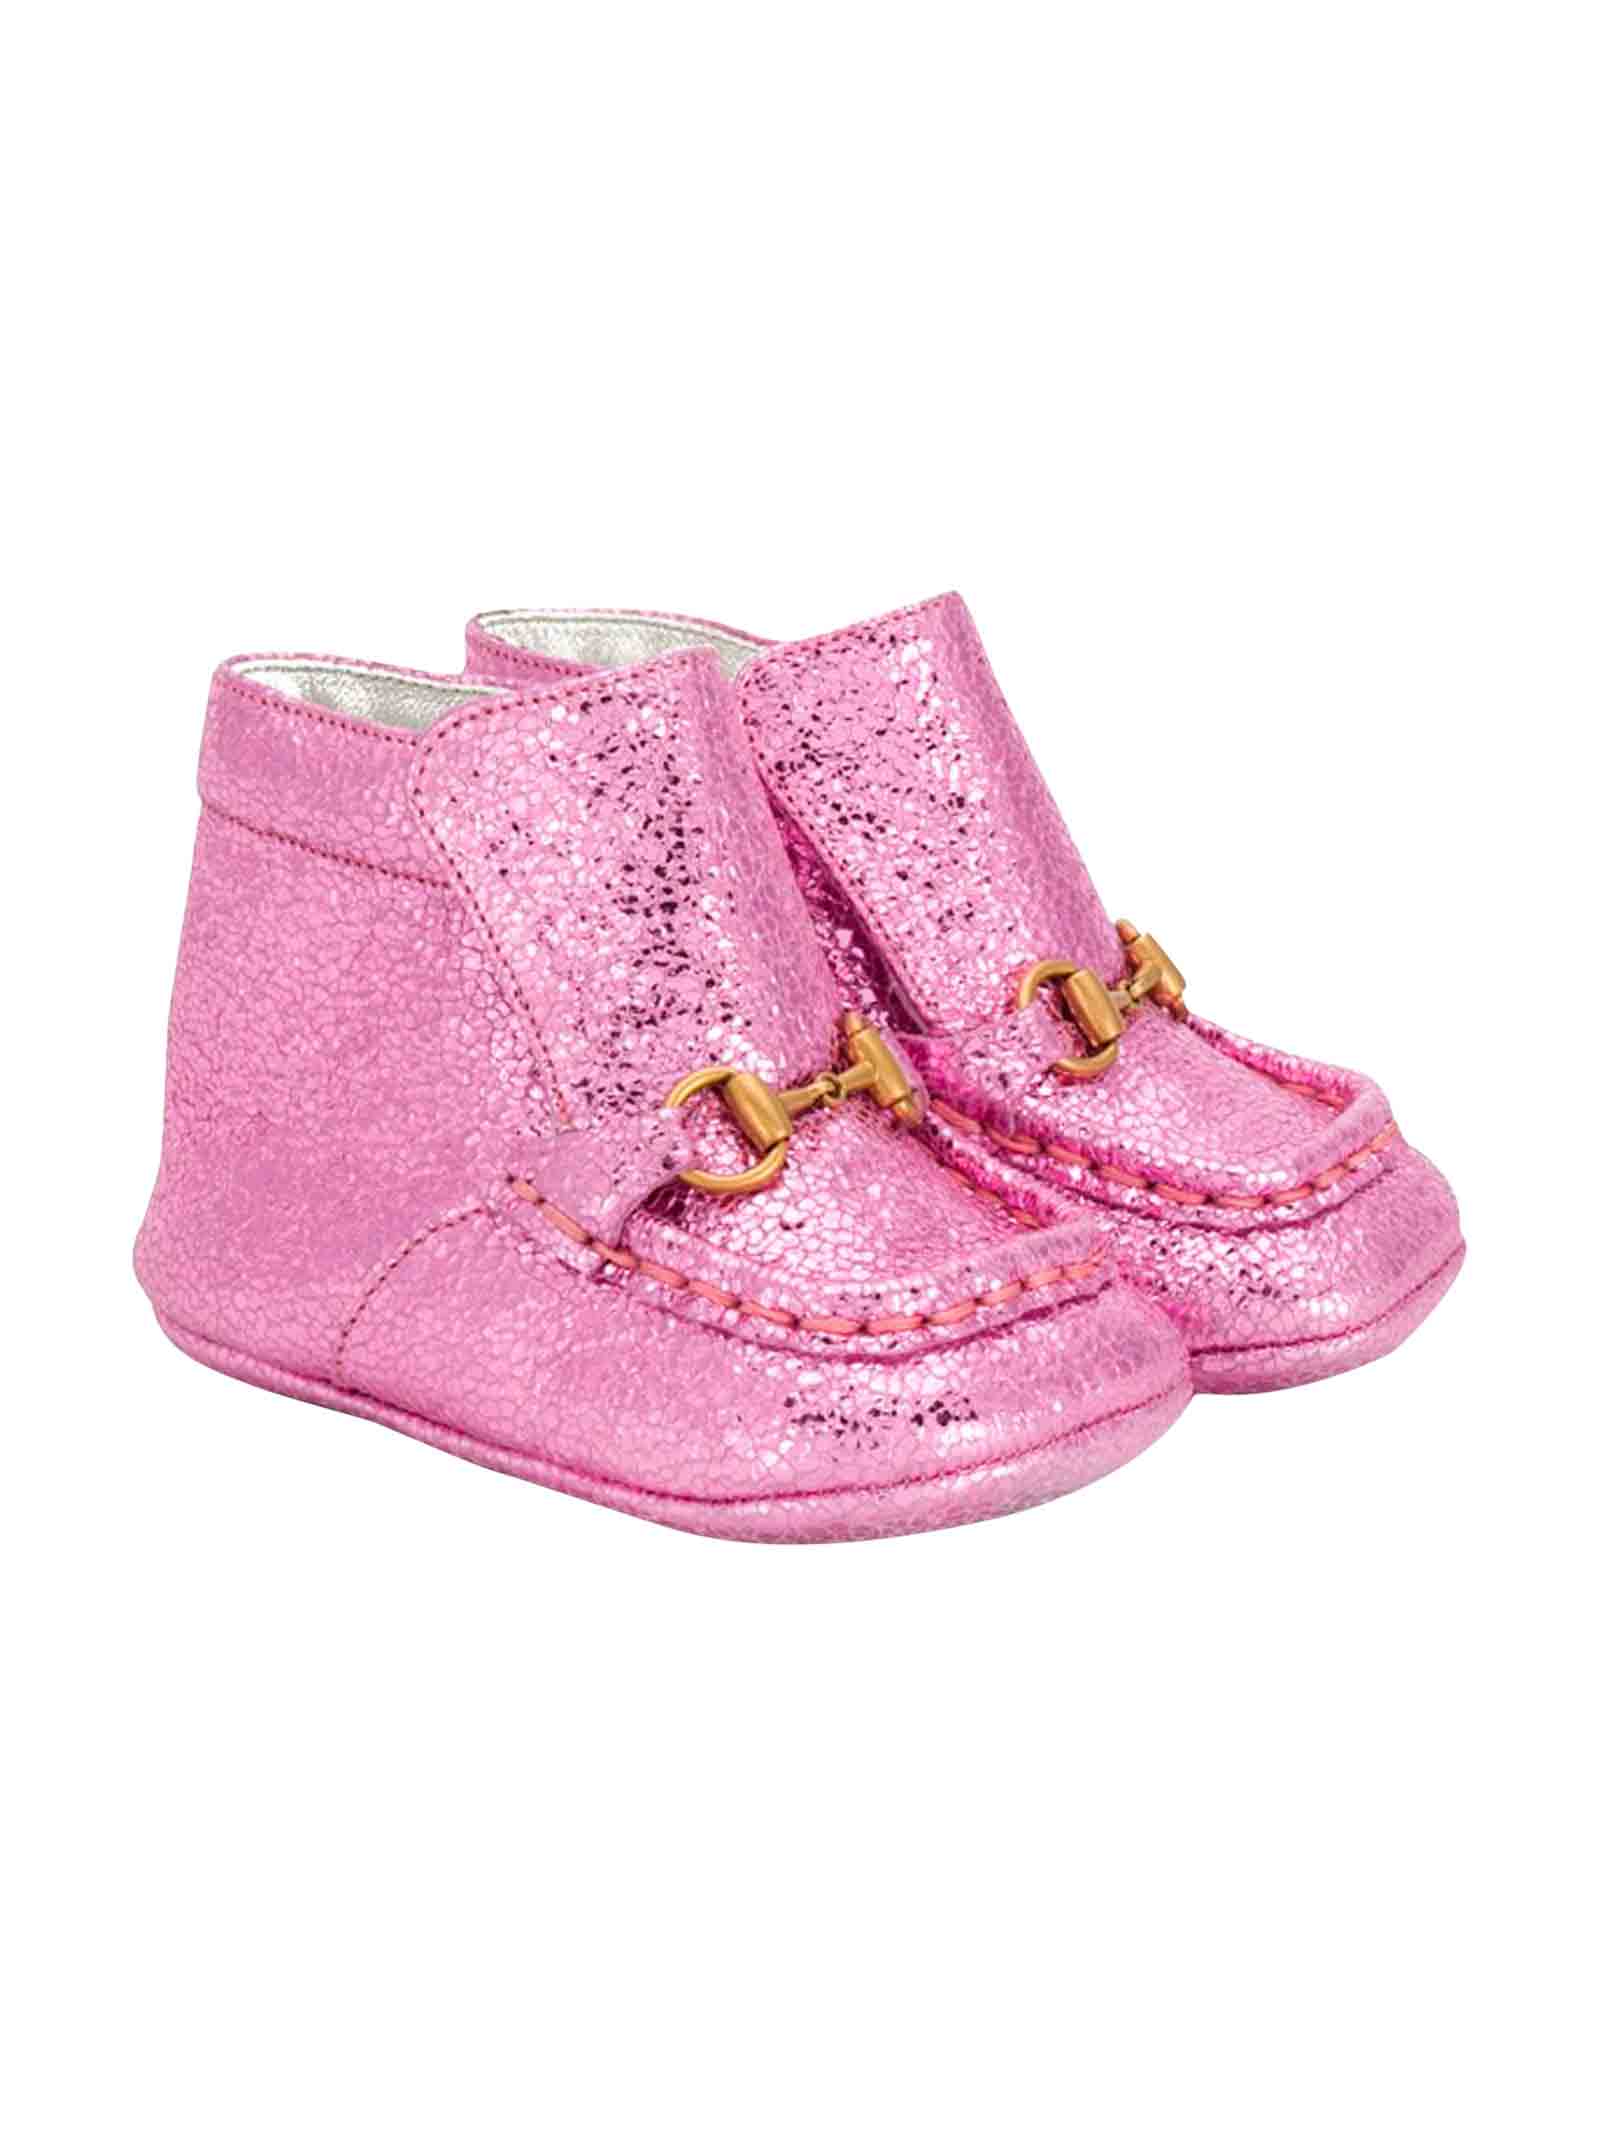 pink baby gucci shoes